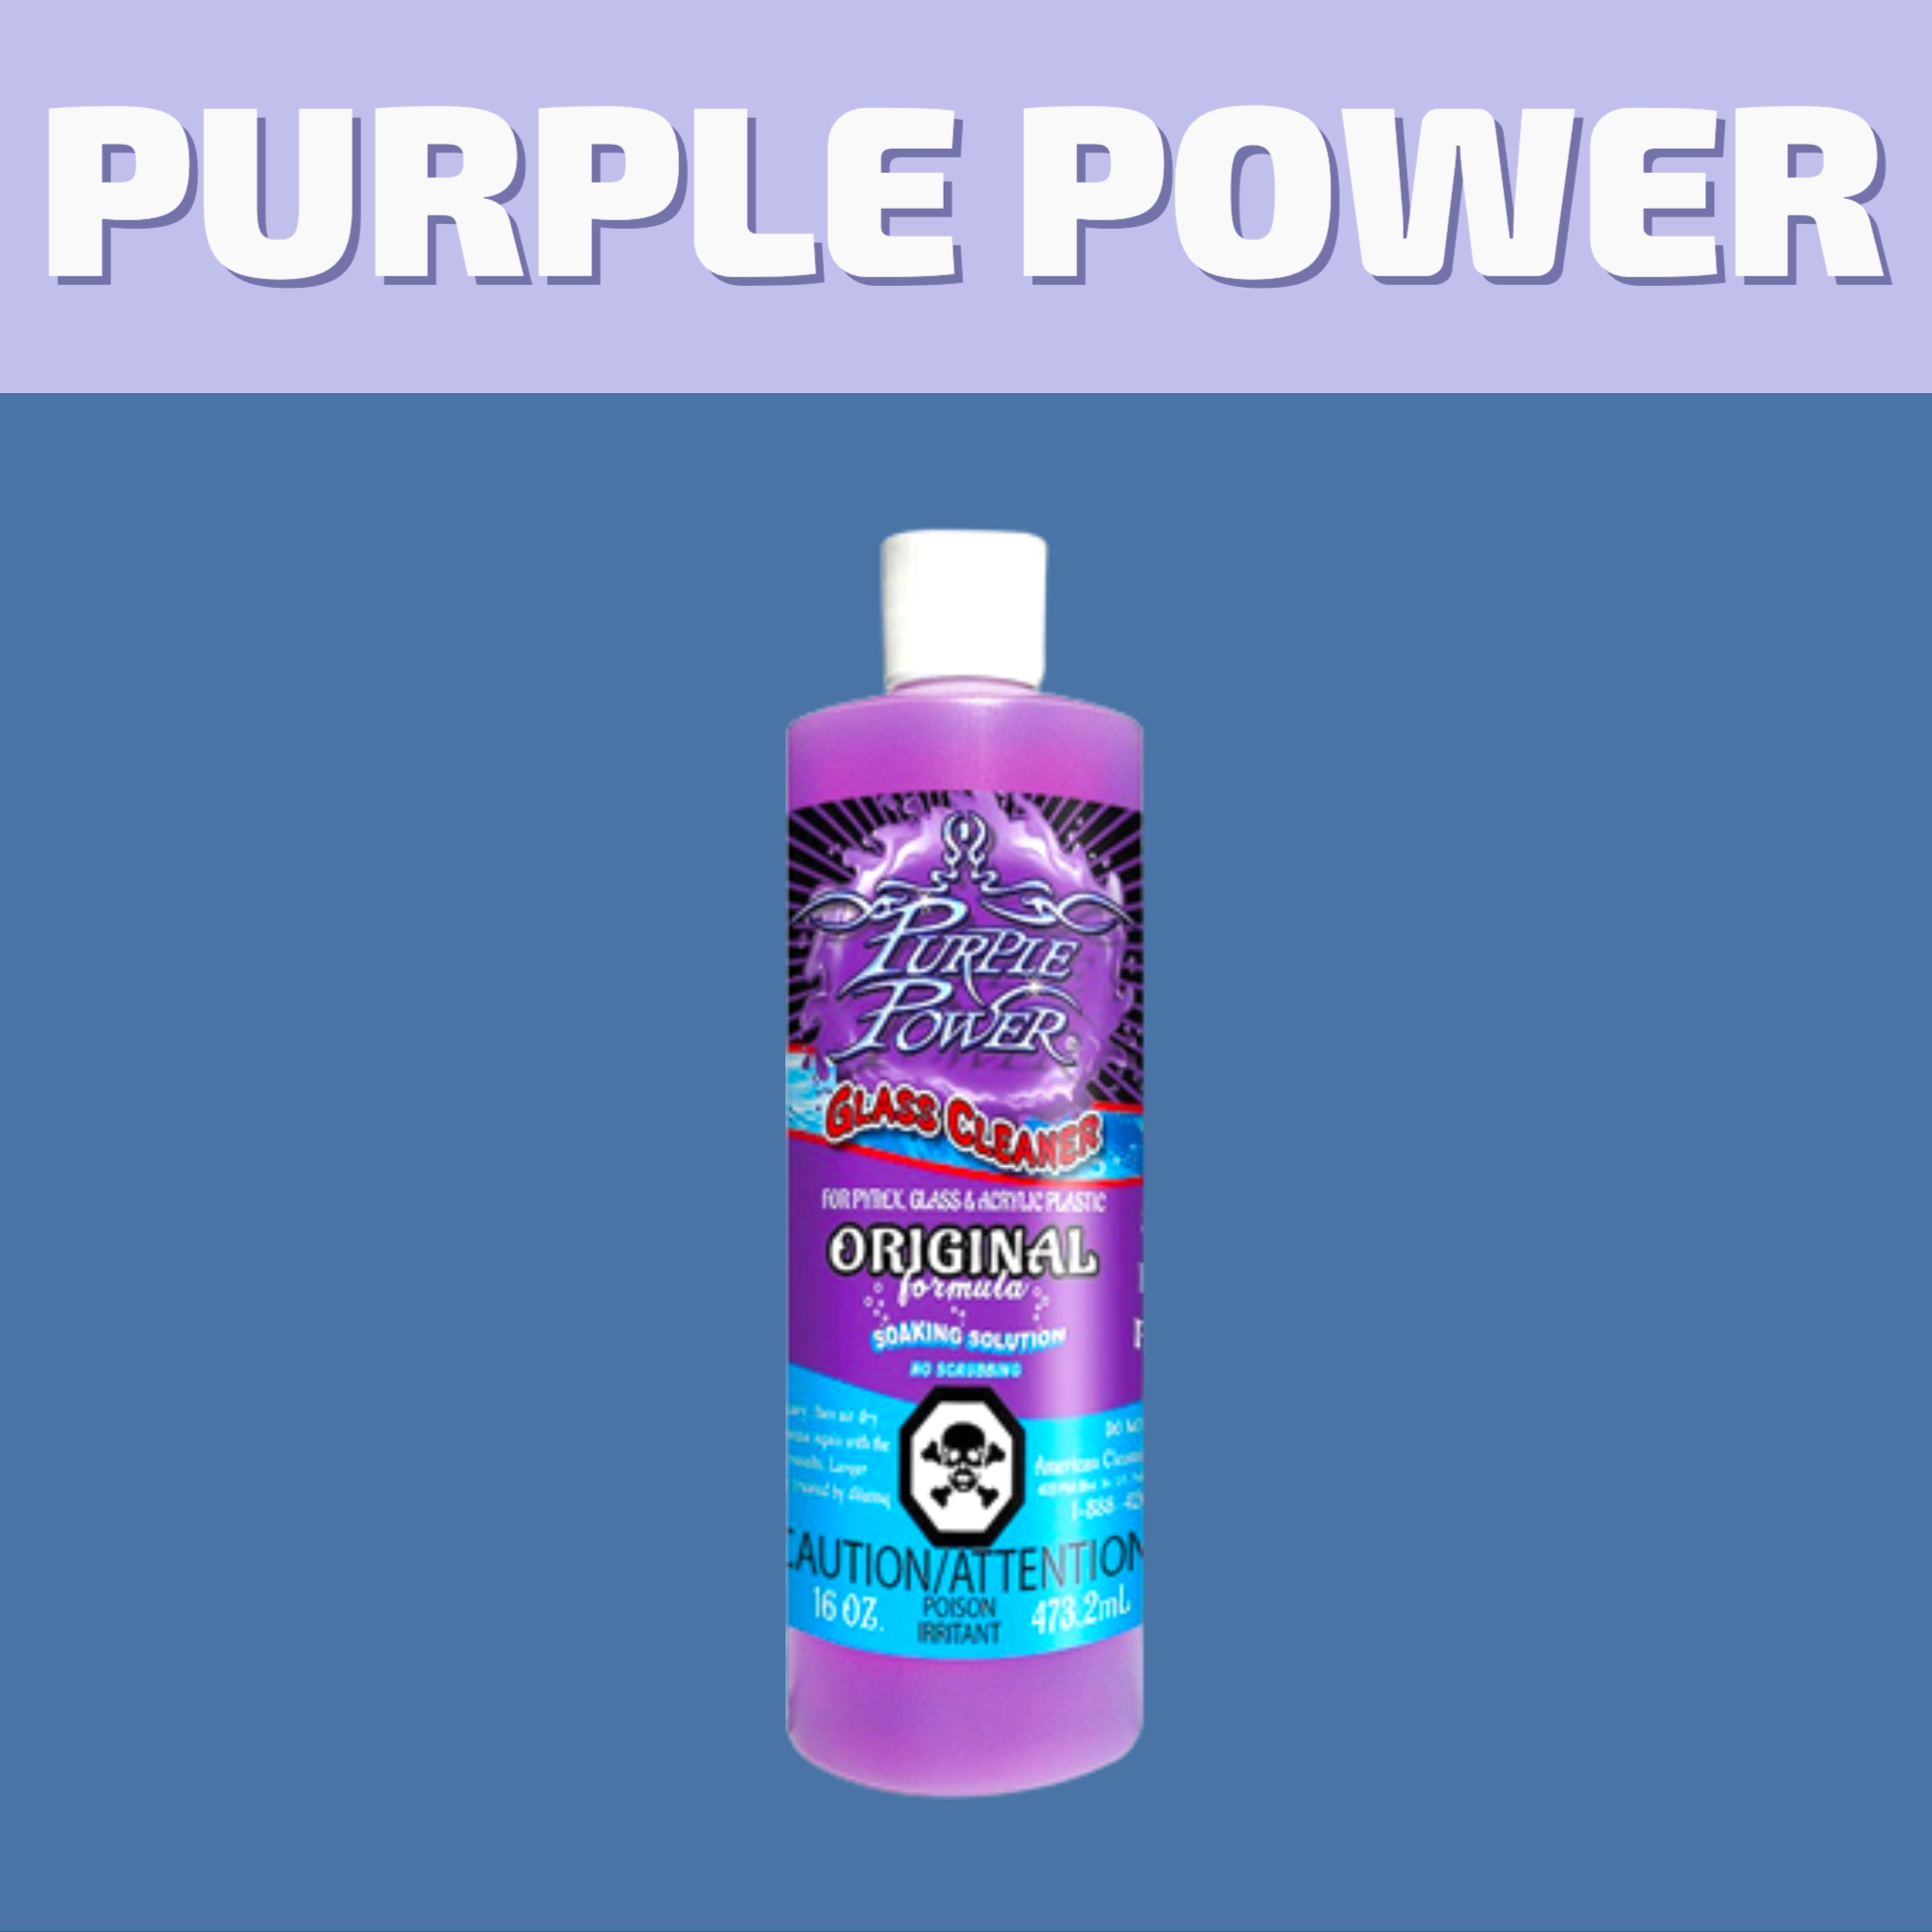 Buy Purple Power and other bong cleaners for same day delivery or visit the best cannabis store on 580 Academy Road.   